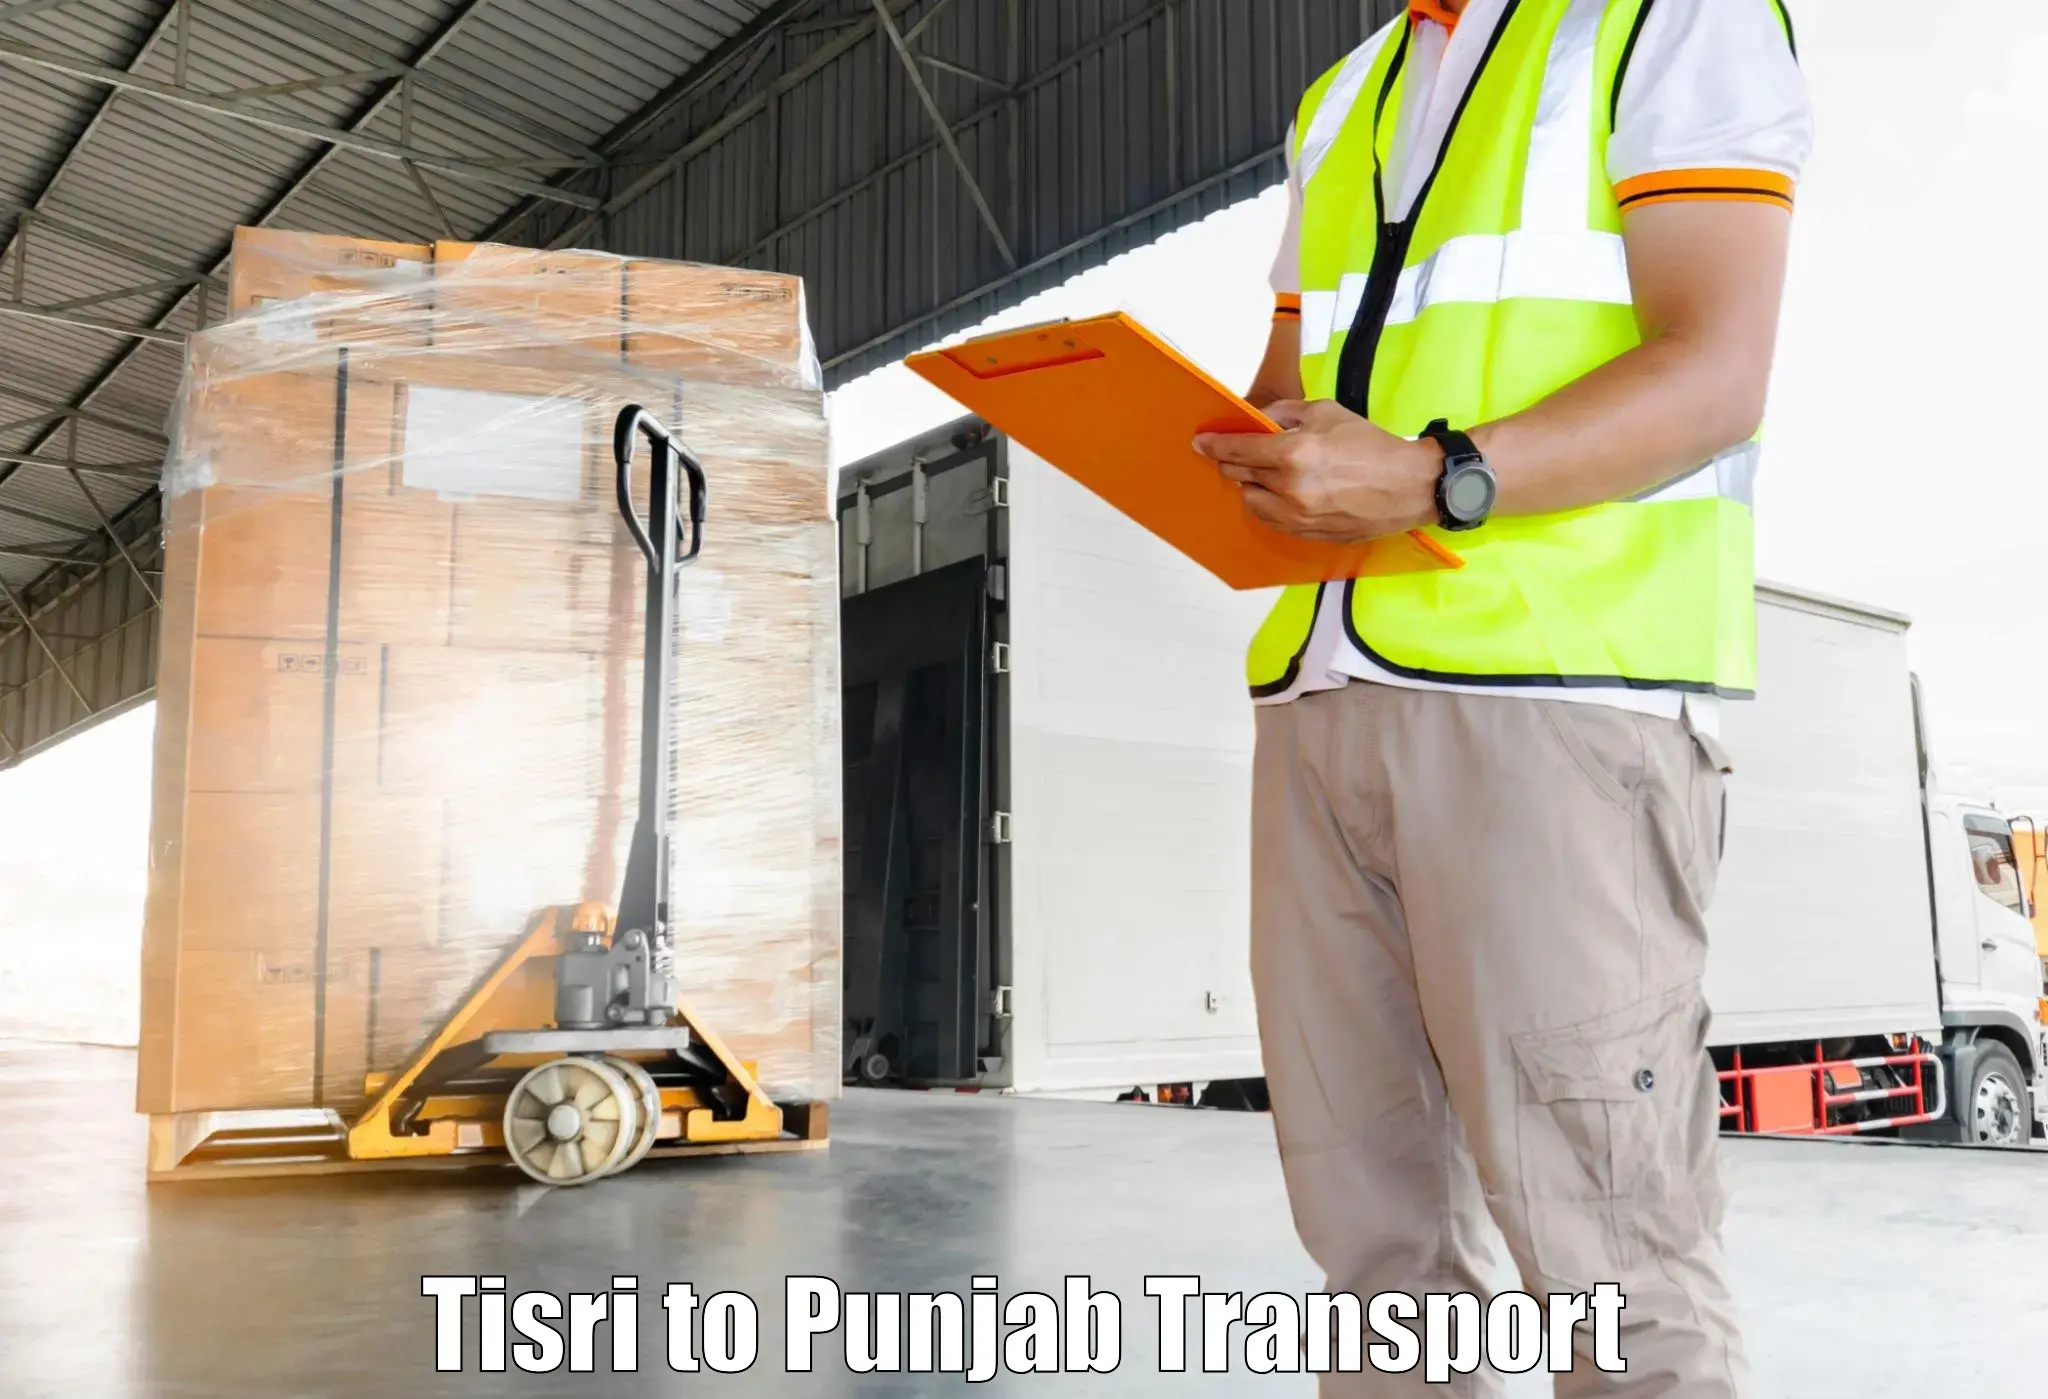 Transport bike from one state to another Tisri to Ludhiana